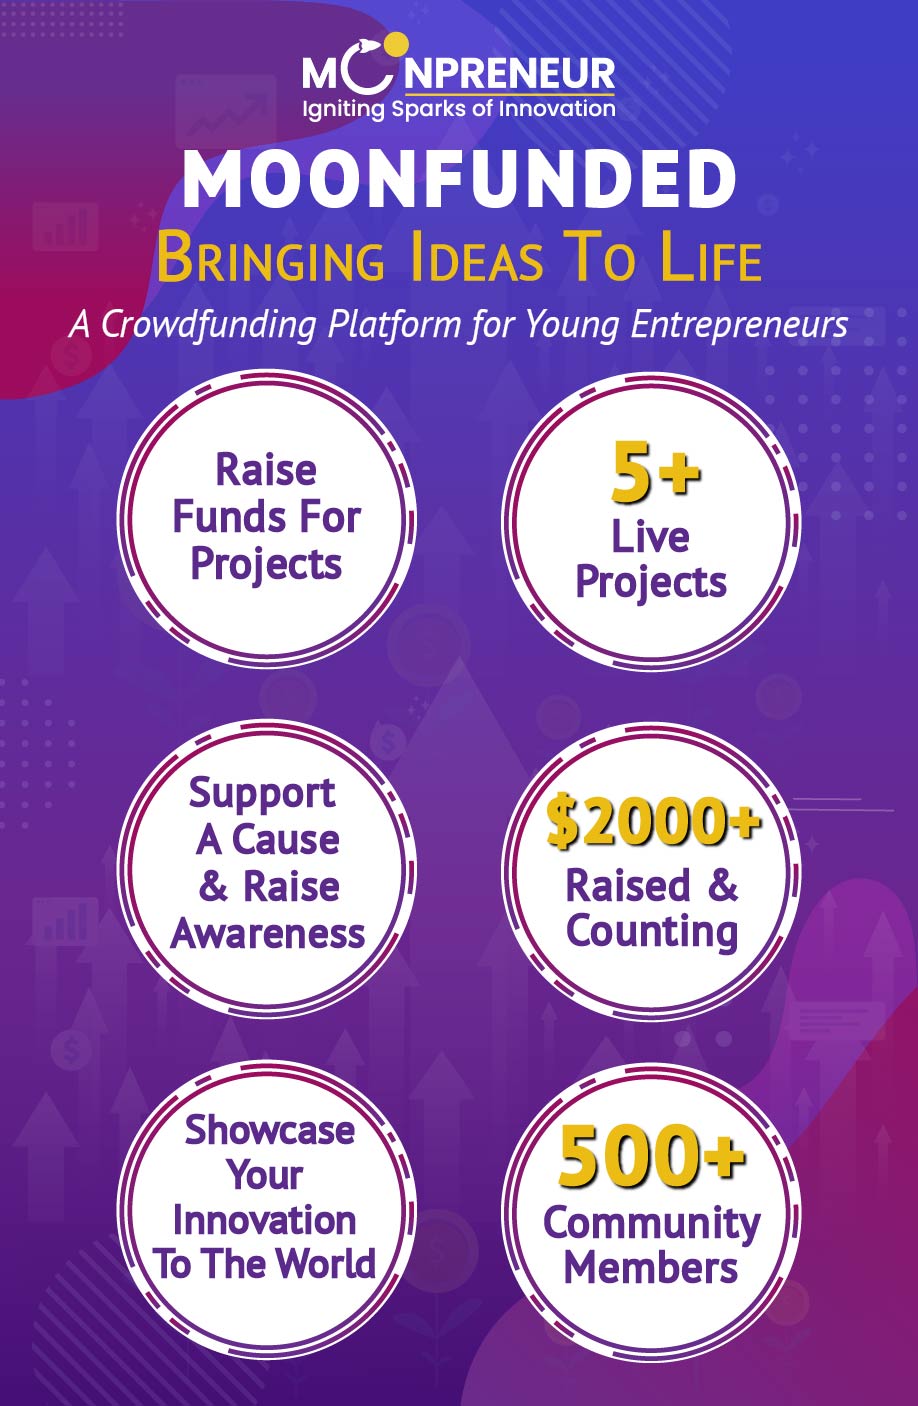 Moonfunded - A Crowdfunding Platform for Young Entrepreneurs Infographic